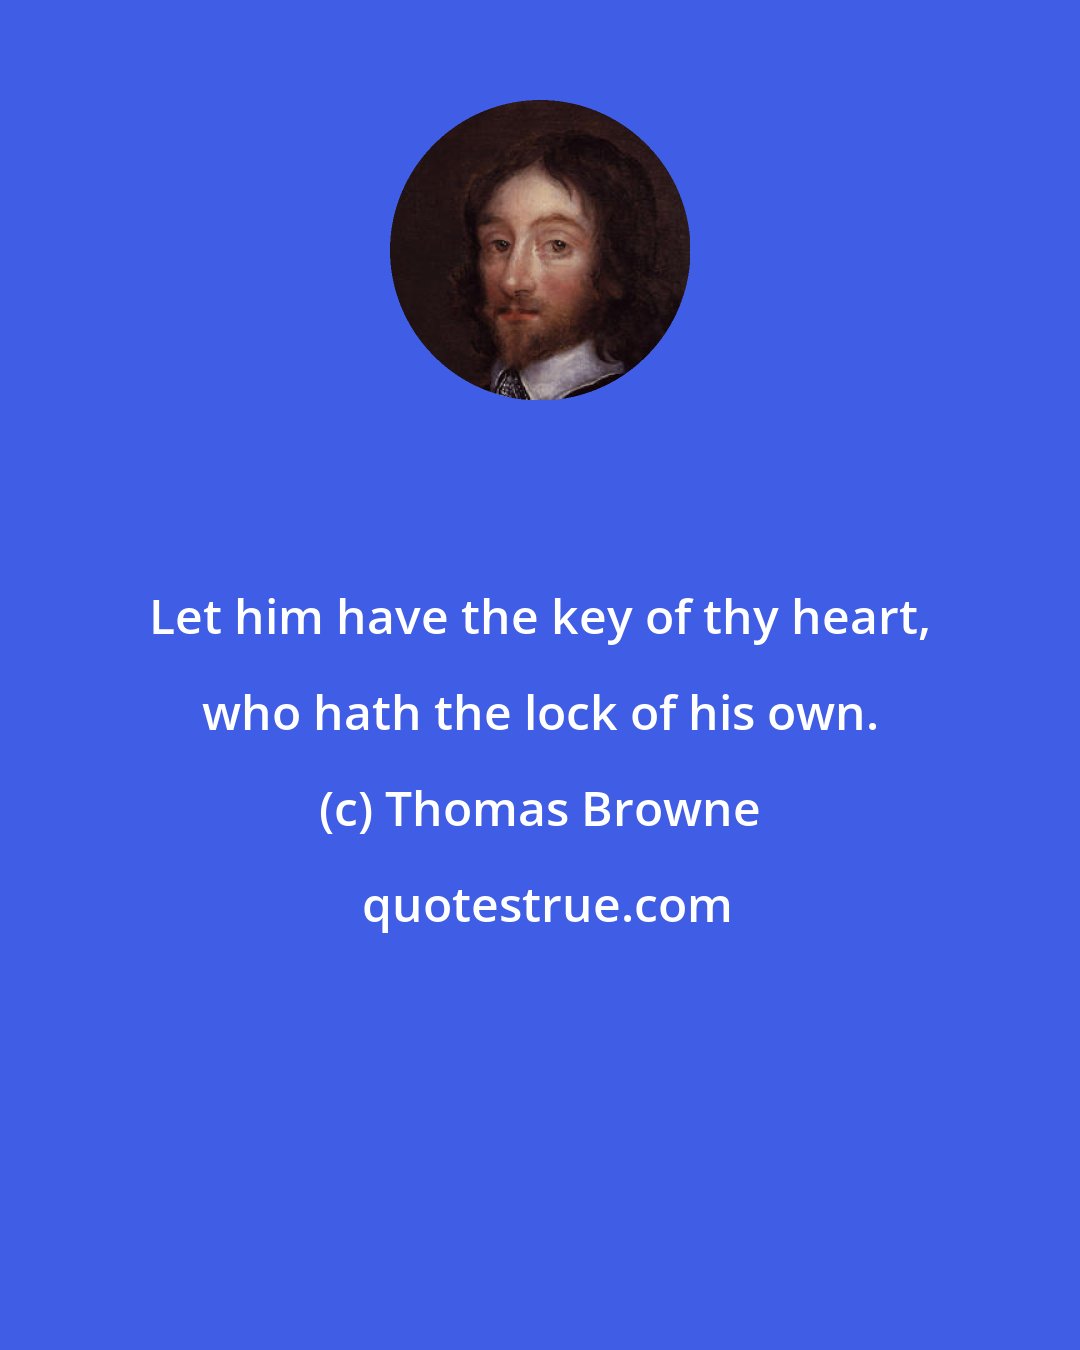 Thomas Browne: Let him have the key of thy heart, who hath the lock of his own.